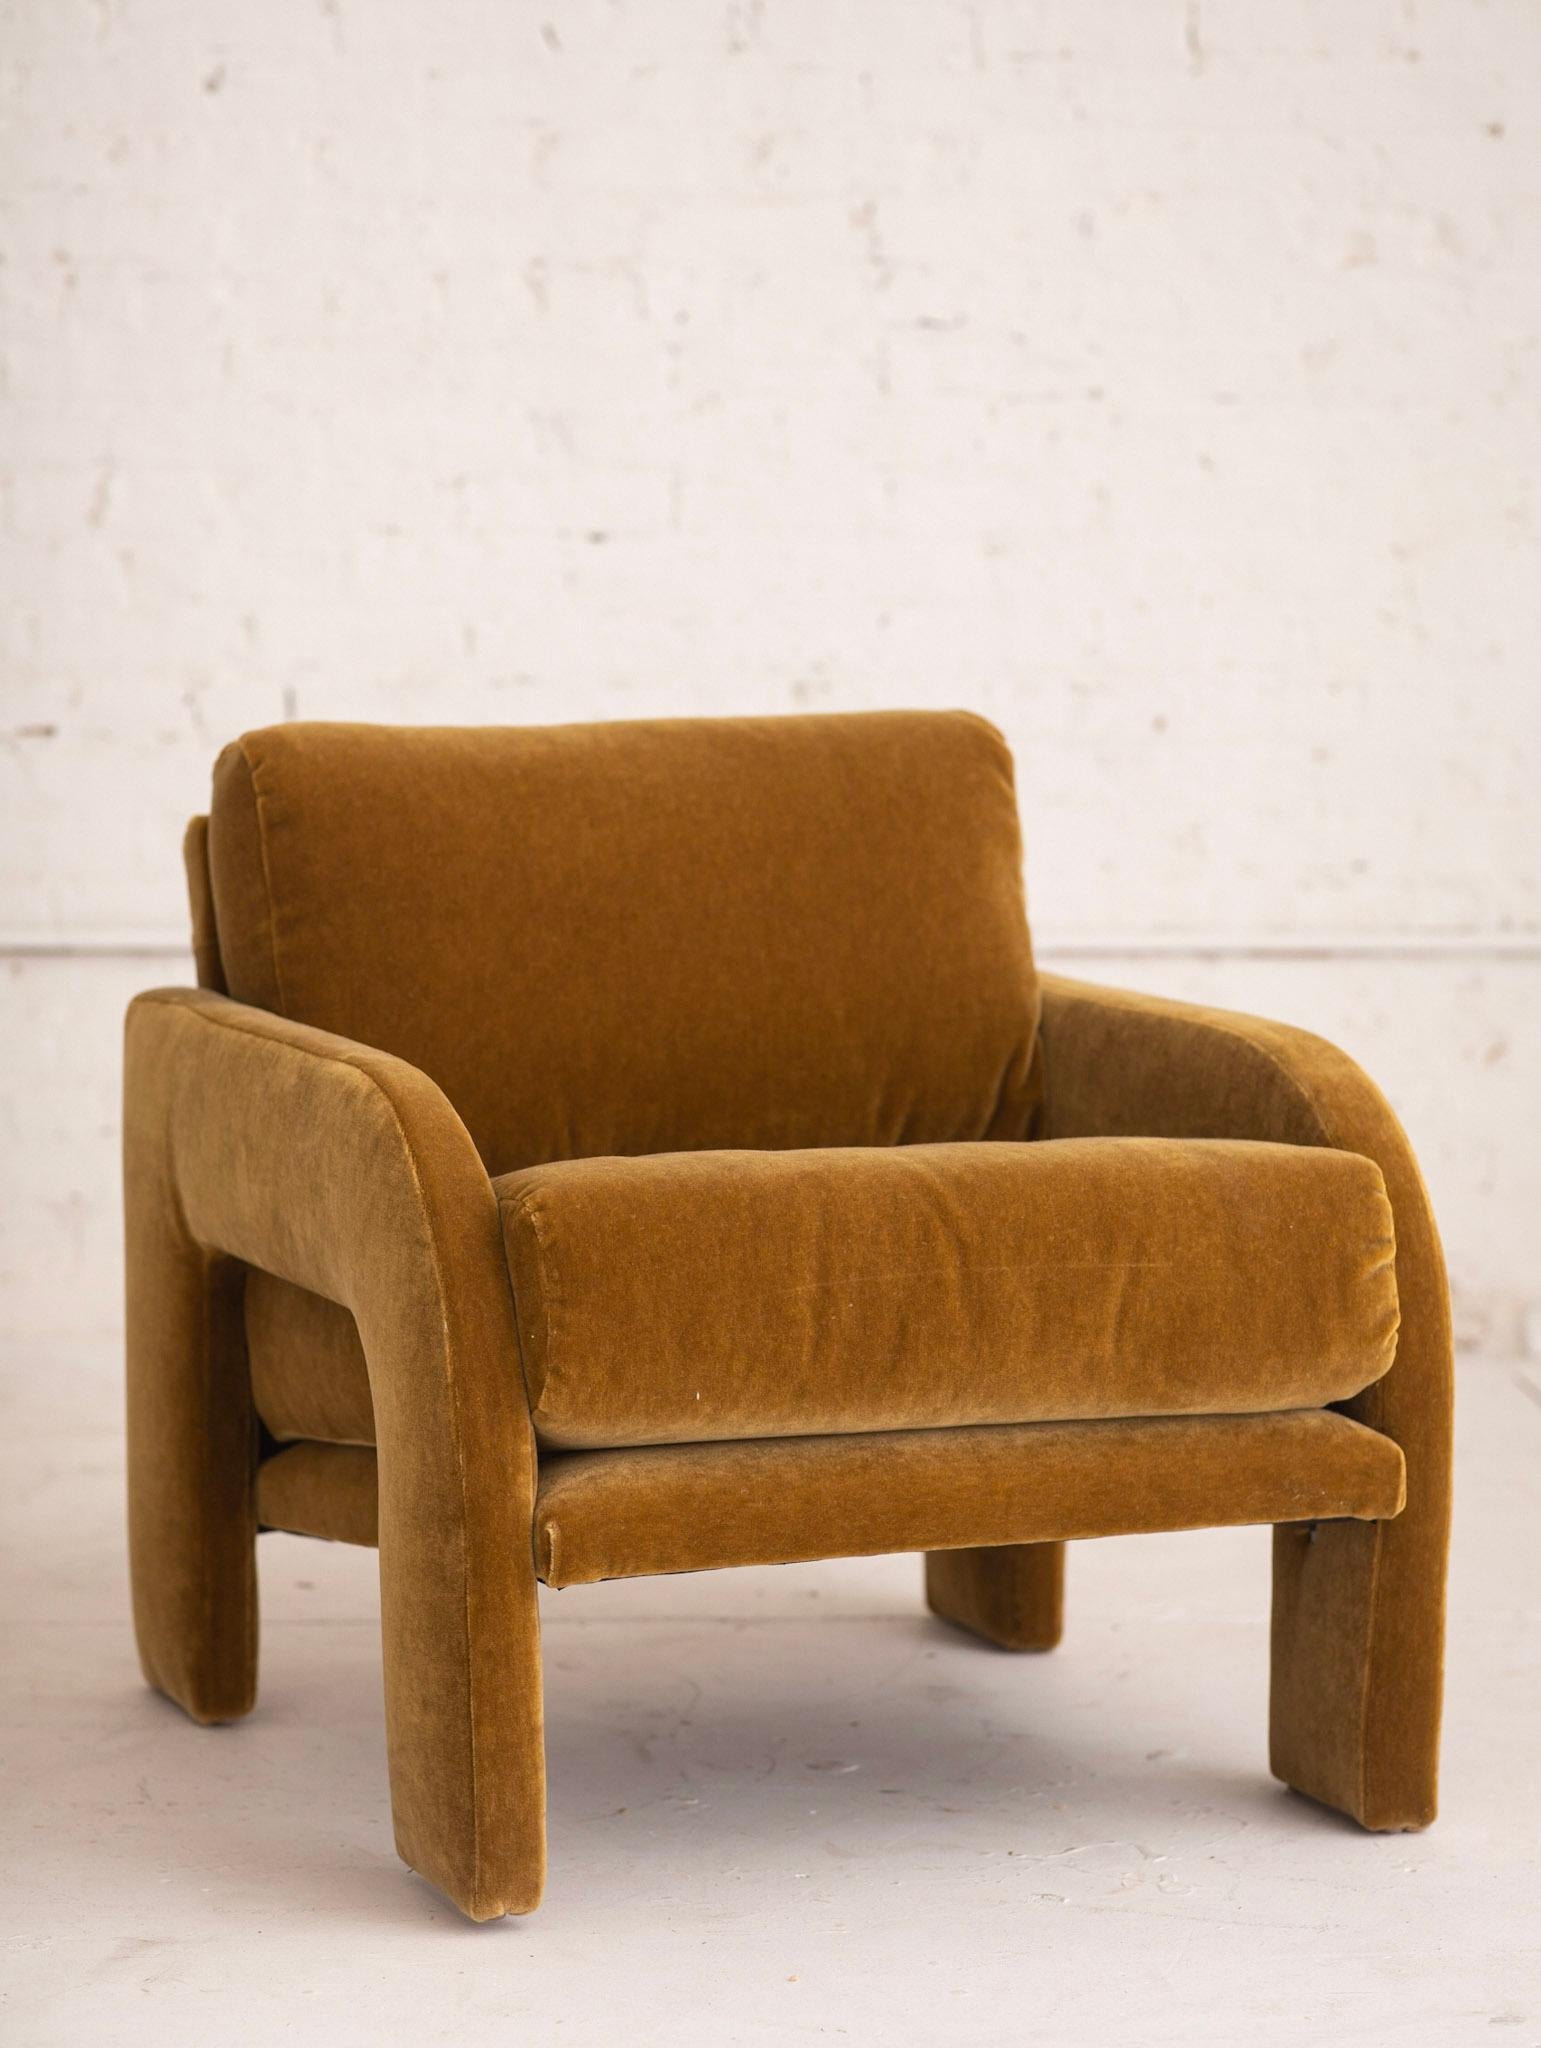 Post-Modern 1980s Postmodern Architectural Armchair in Camel Mohair